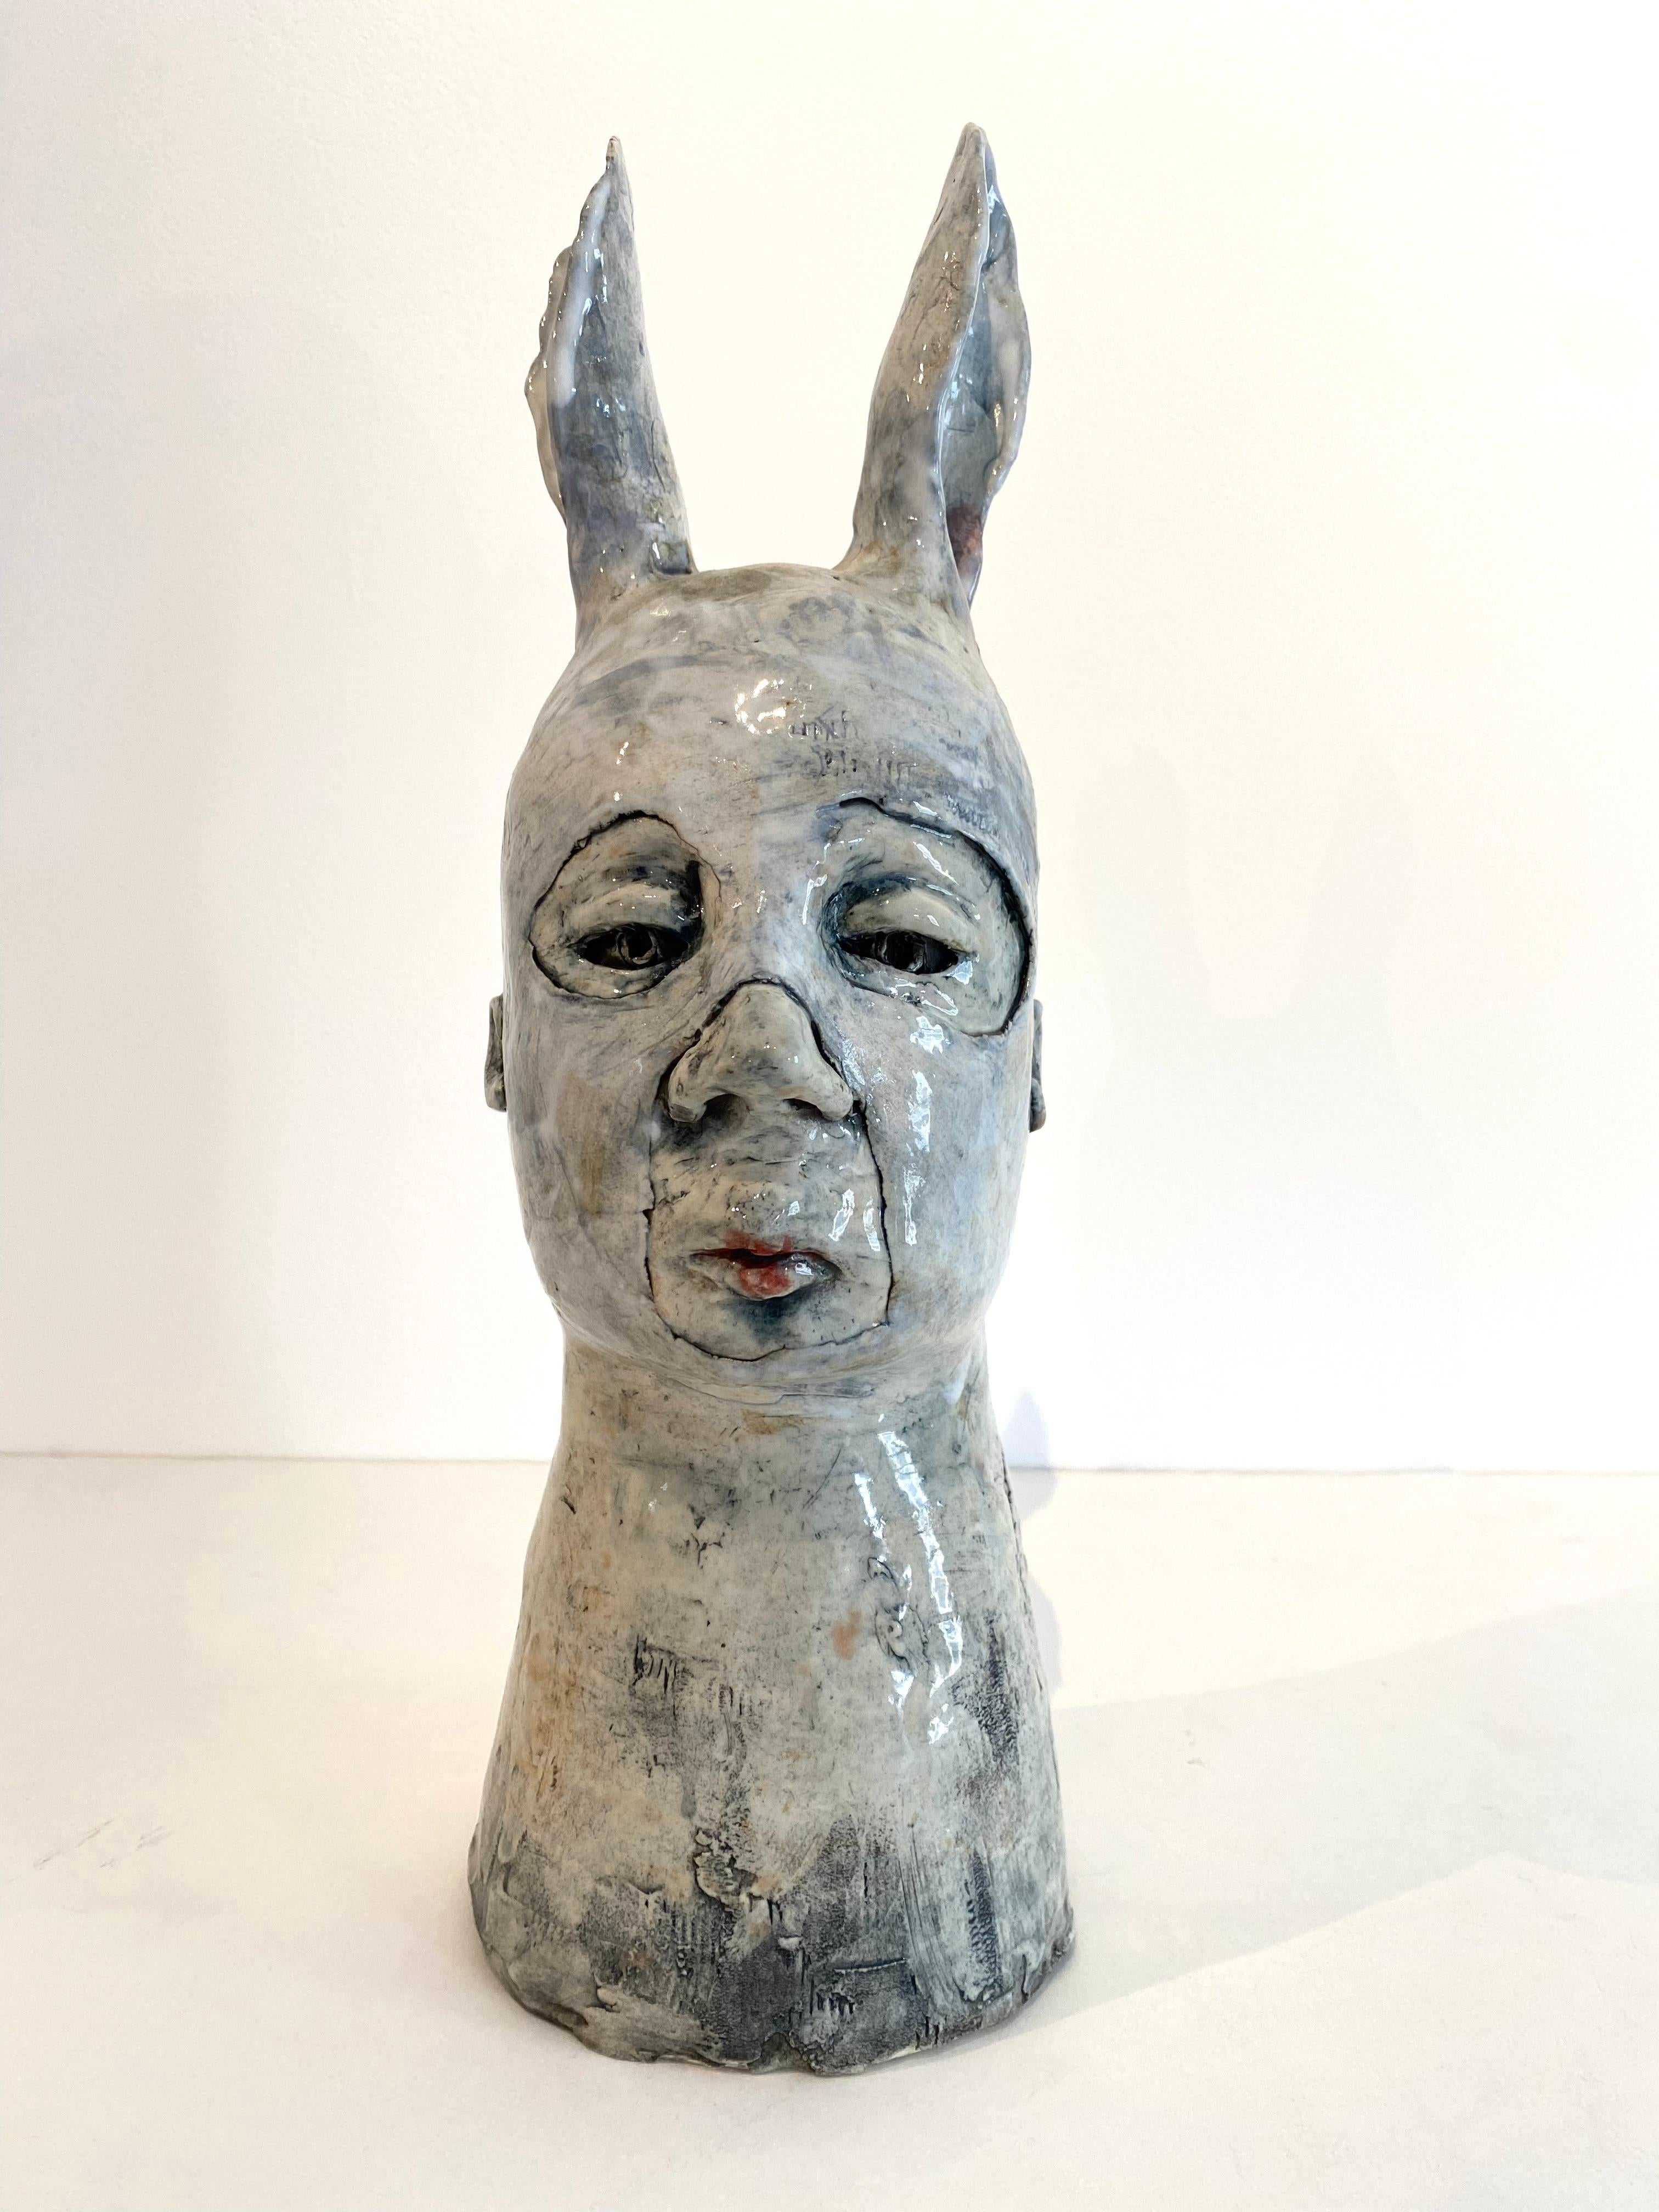 Ashley Benton Figurative Sculpture - Ceramic Sculpture: 'He Is Put There To Show You Where You Aren't Free'